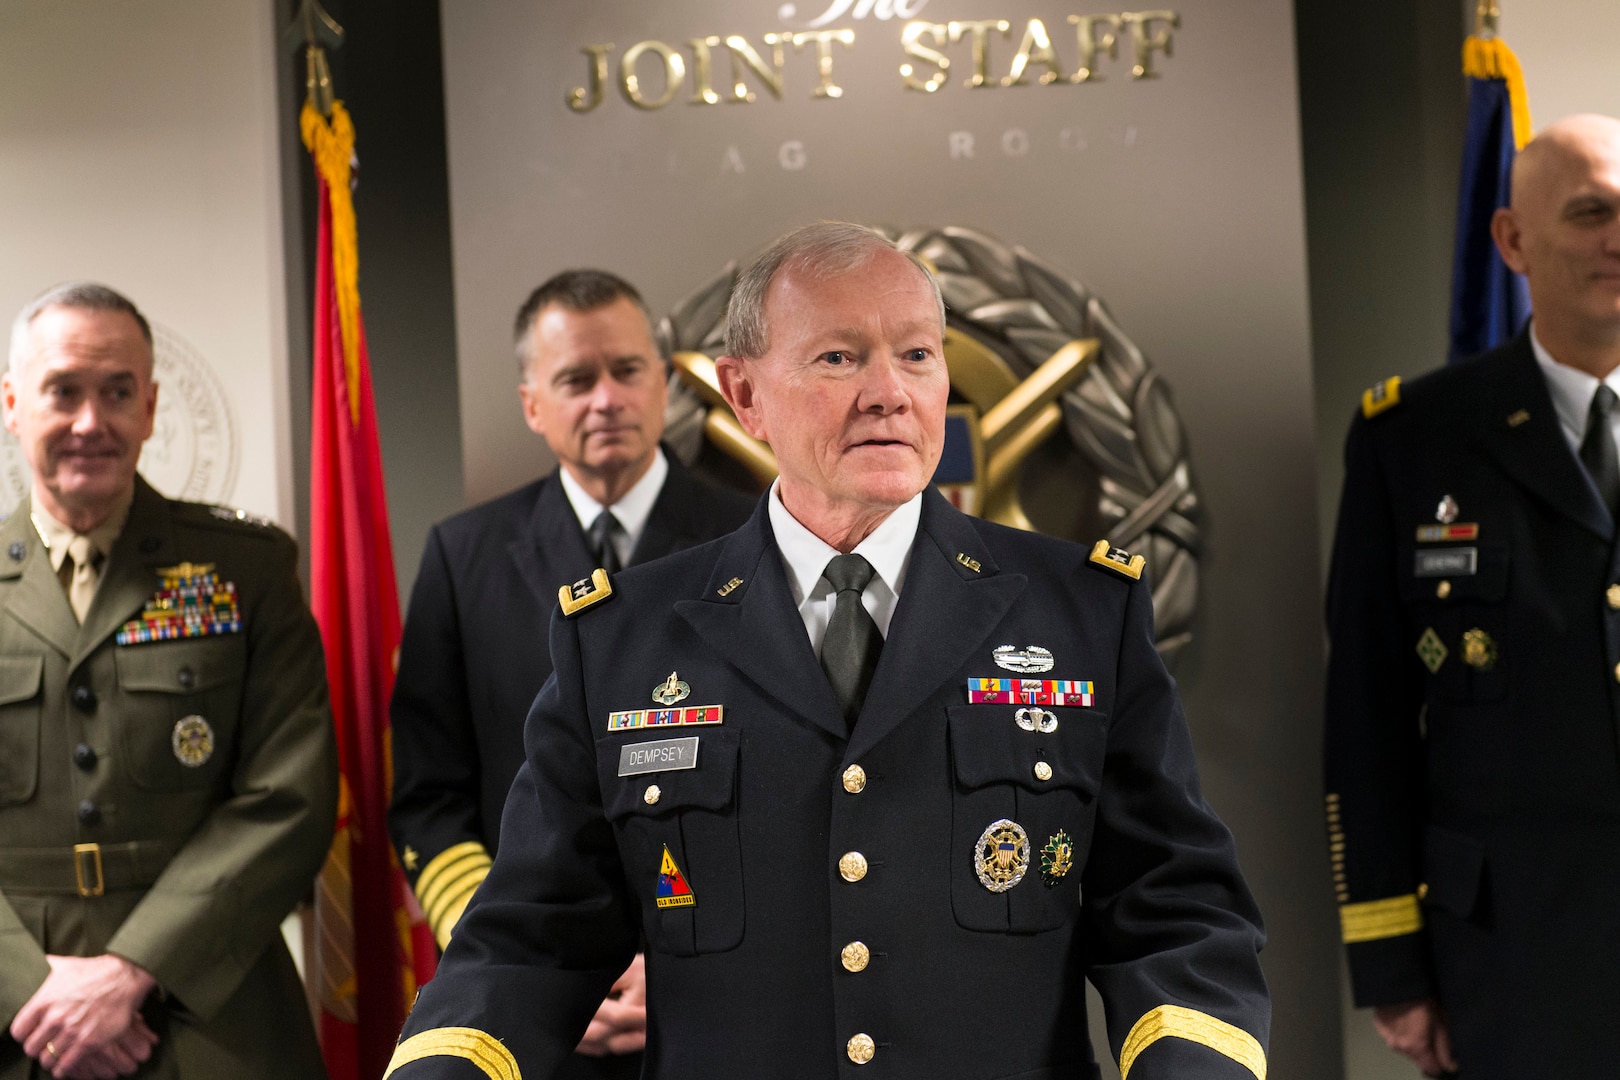 Chairman of the Joint Chiefs of Staff Gen. Martin E. Dempsey and the Joint Chiefs of address leaders of veteran organizations prior to signing a "28-star" letter during a Commitment to Service ceremony in the Pentagon, Feb. 2, 2015. The letter is written for veterans, who have served in uniform since 9/11, to embrace their transition into civilian life and to build upon their experiences while seeking new ways to serve their communities. 